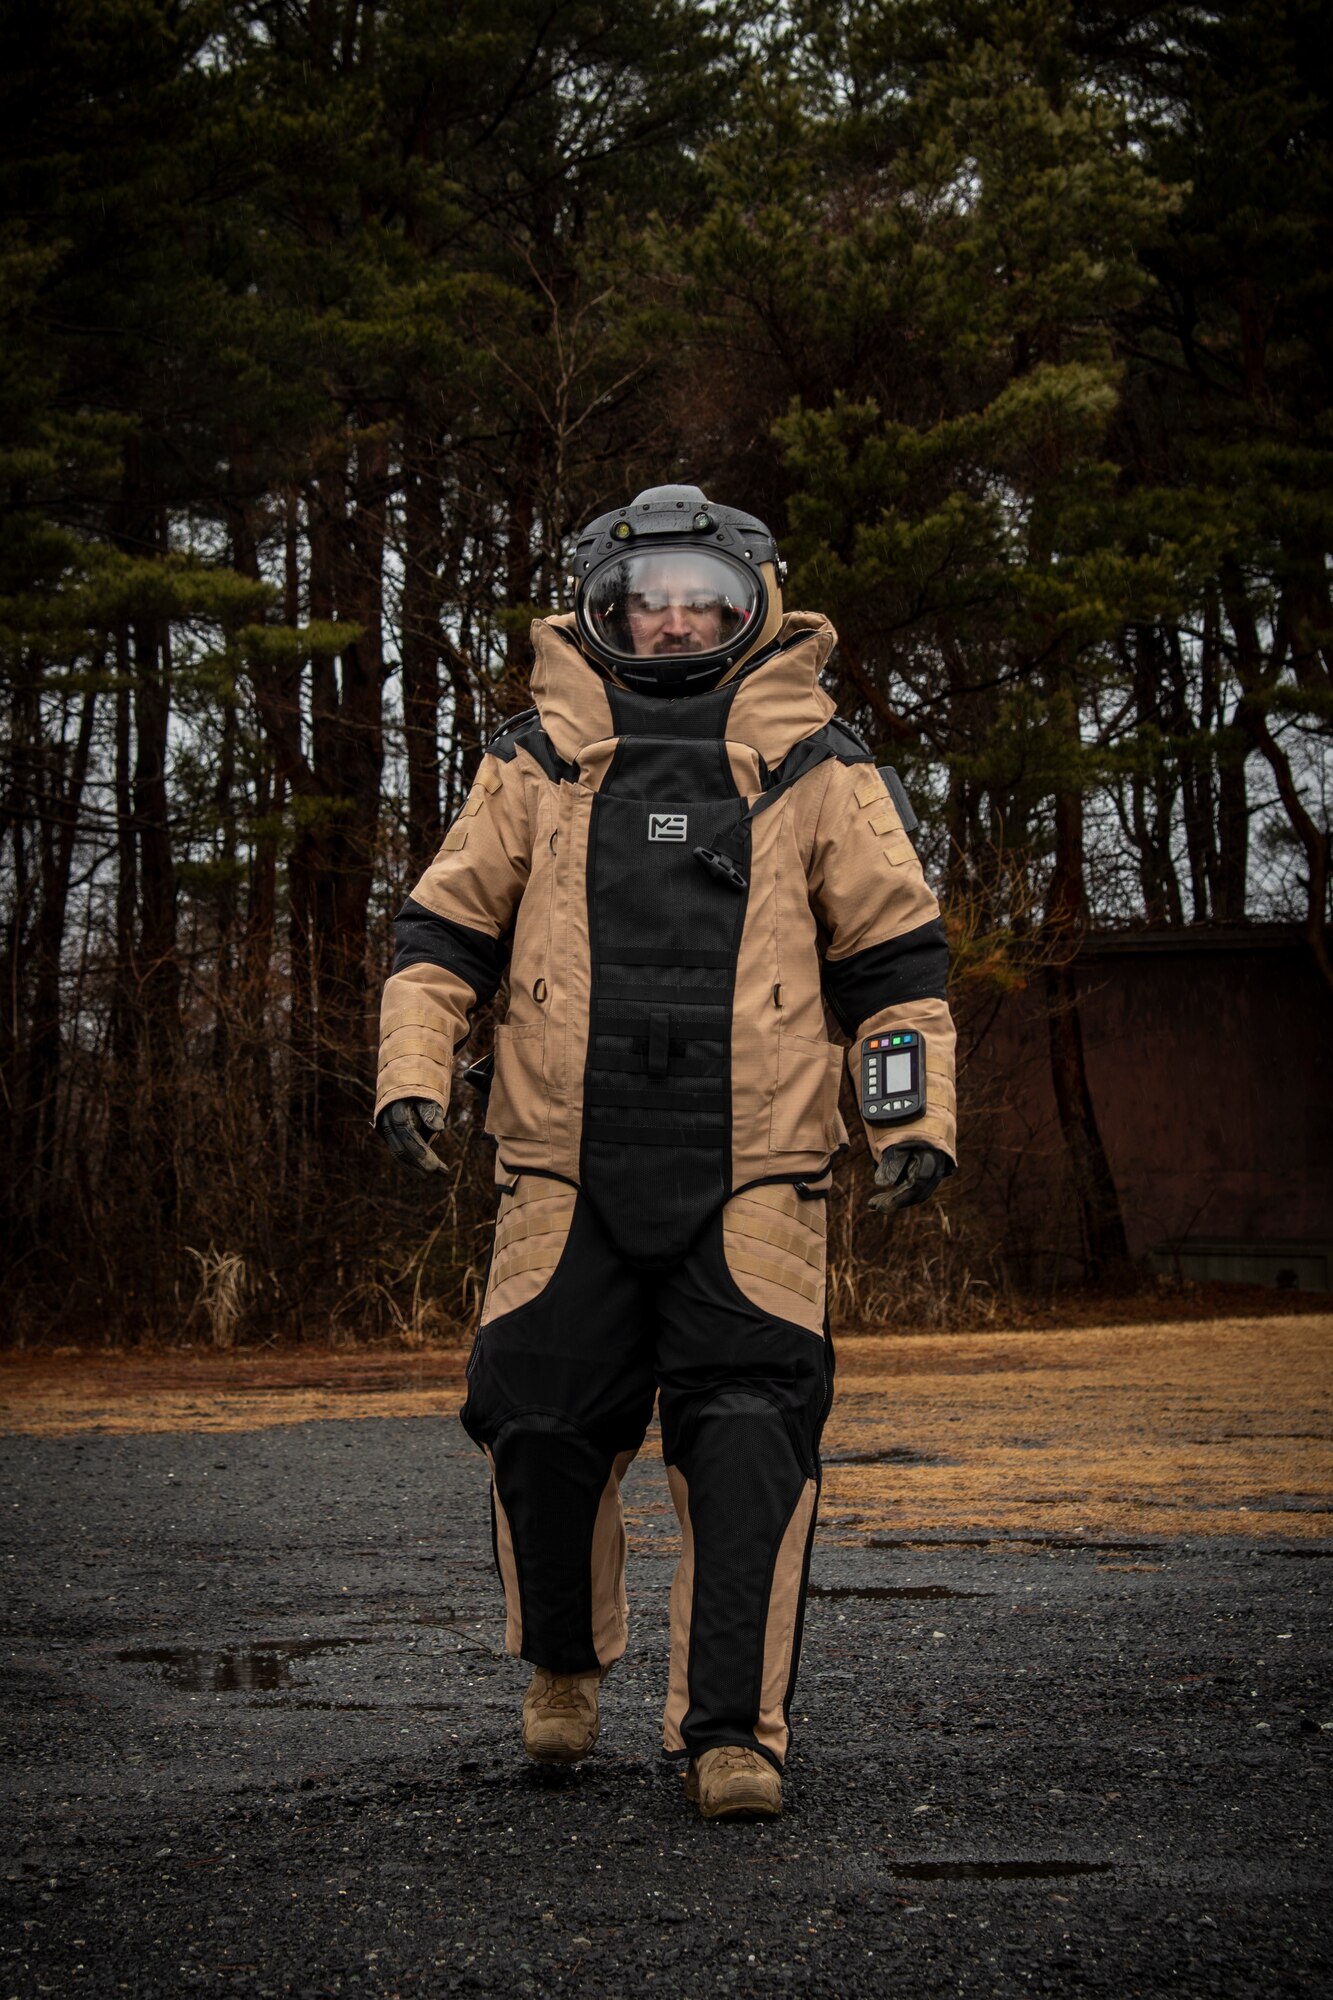 U.S. Air Force Staff Sgt. Tanner Connally, a 35th Civil Engineer Squadron Explosive Ordnance Disposal journeyman, walks to the training site in a bomb suit at Misawa Air Base, Japan, March 3, 2020. The bomb suit contains plates that protect personnel from any shrapnel if an improvised explosive device detonates. (U.S. Air Force photo by Airman 1st Class China M. Shock)